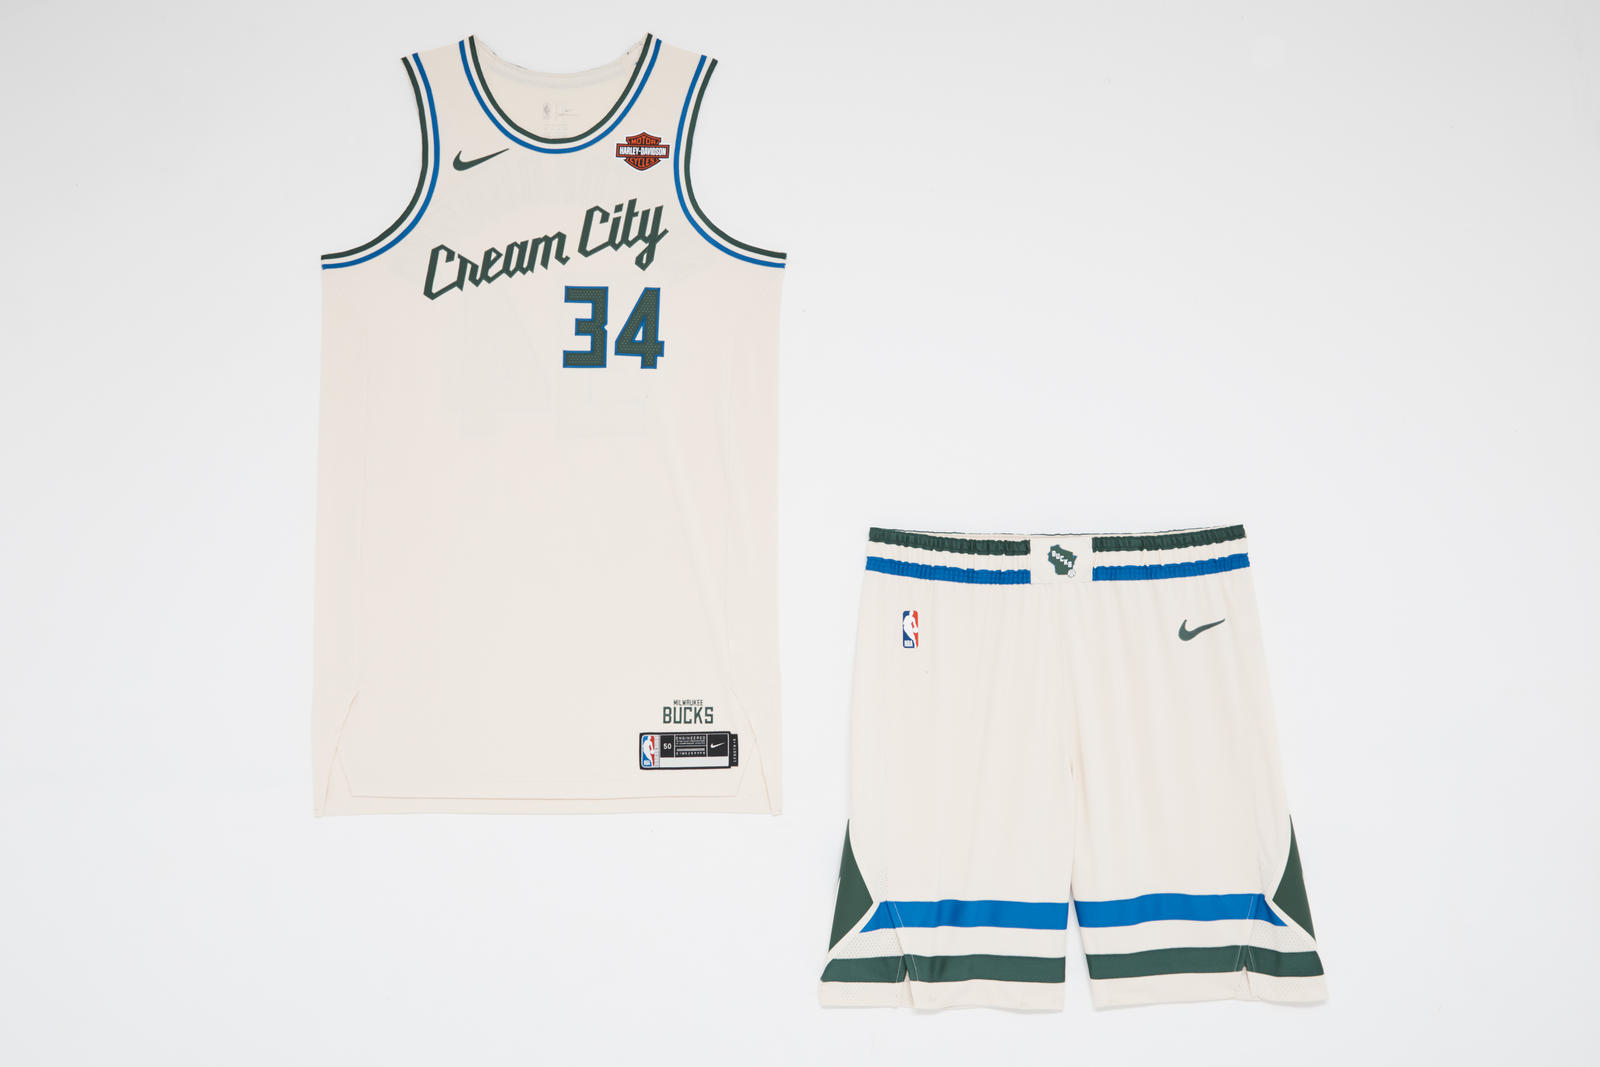 Nike Unveils 2019-20 NBA City Edition Uniforms: See Here